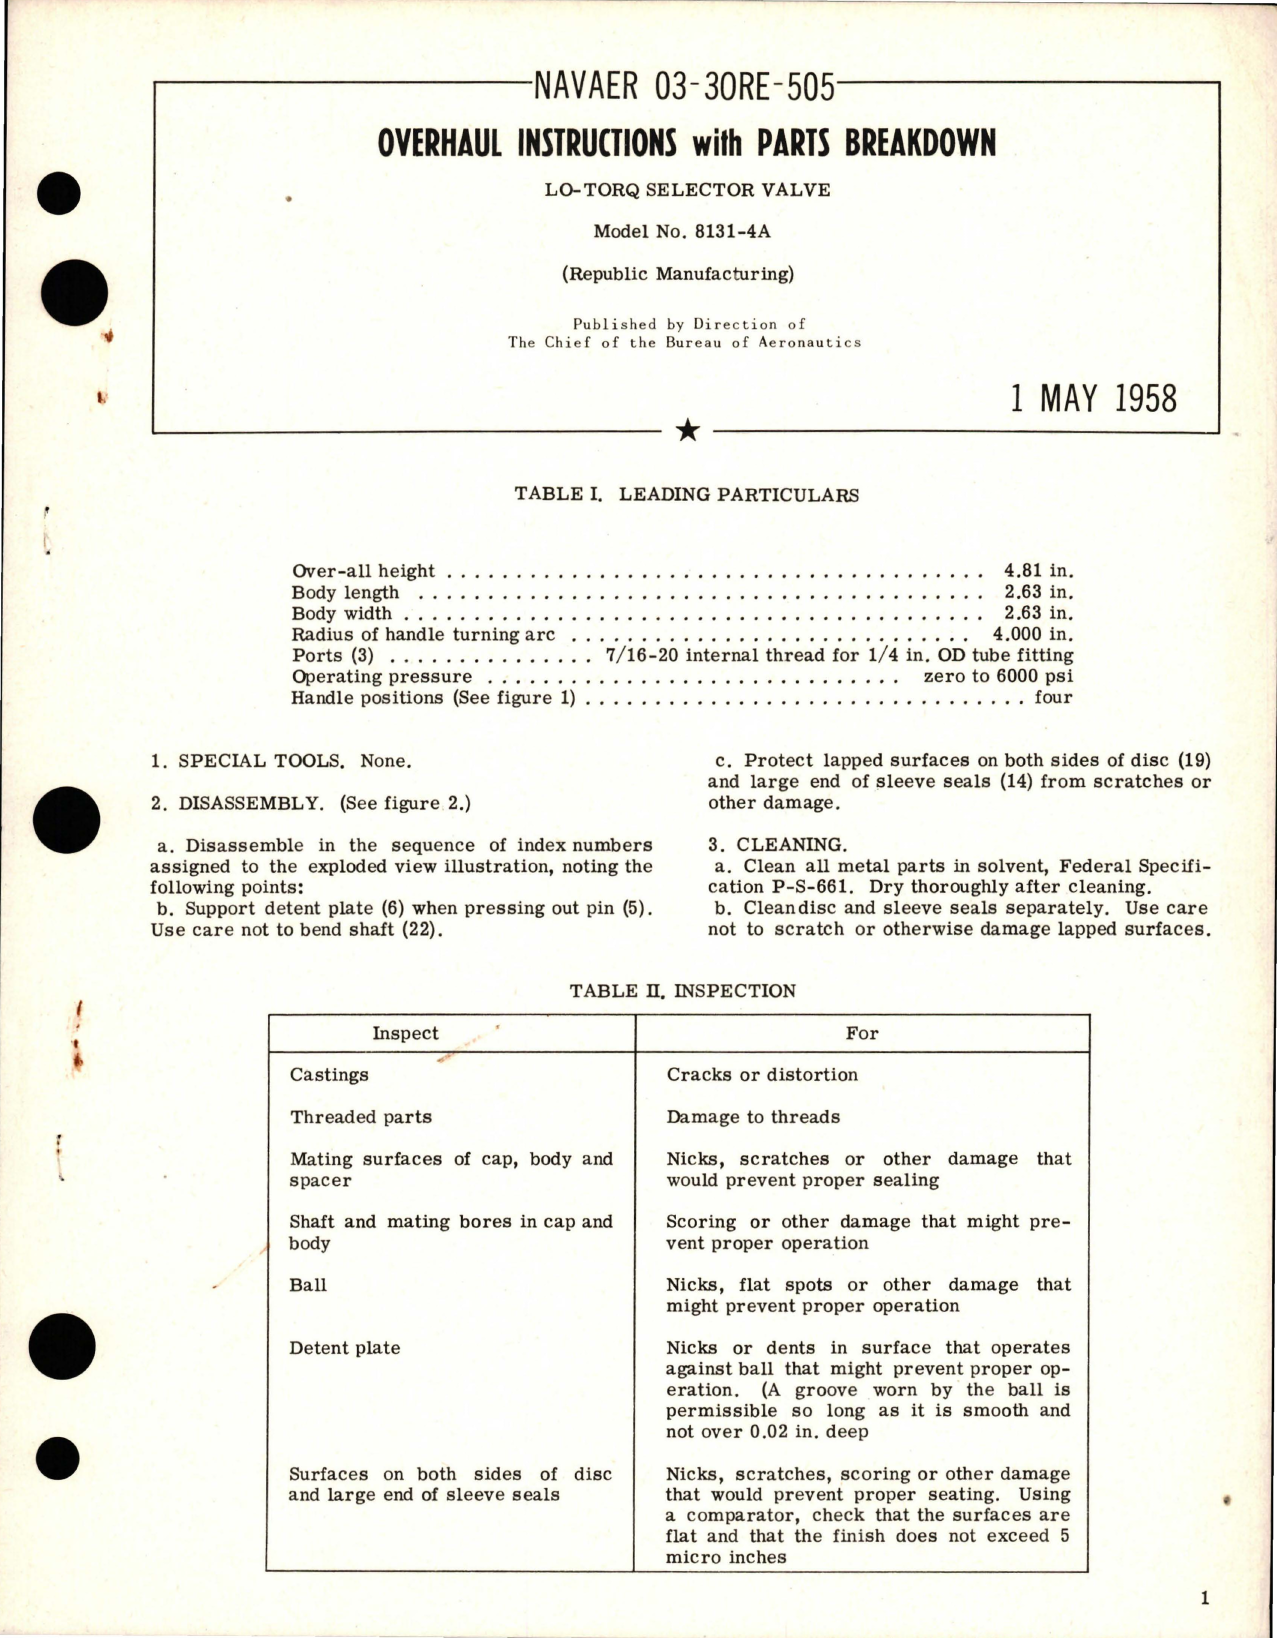 Sample page 1 from AirCorps Library document: Overhaul Instructions with Parts Breakdown for LO-TORQ Selector Valve - Model 8131-4A